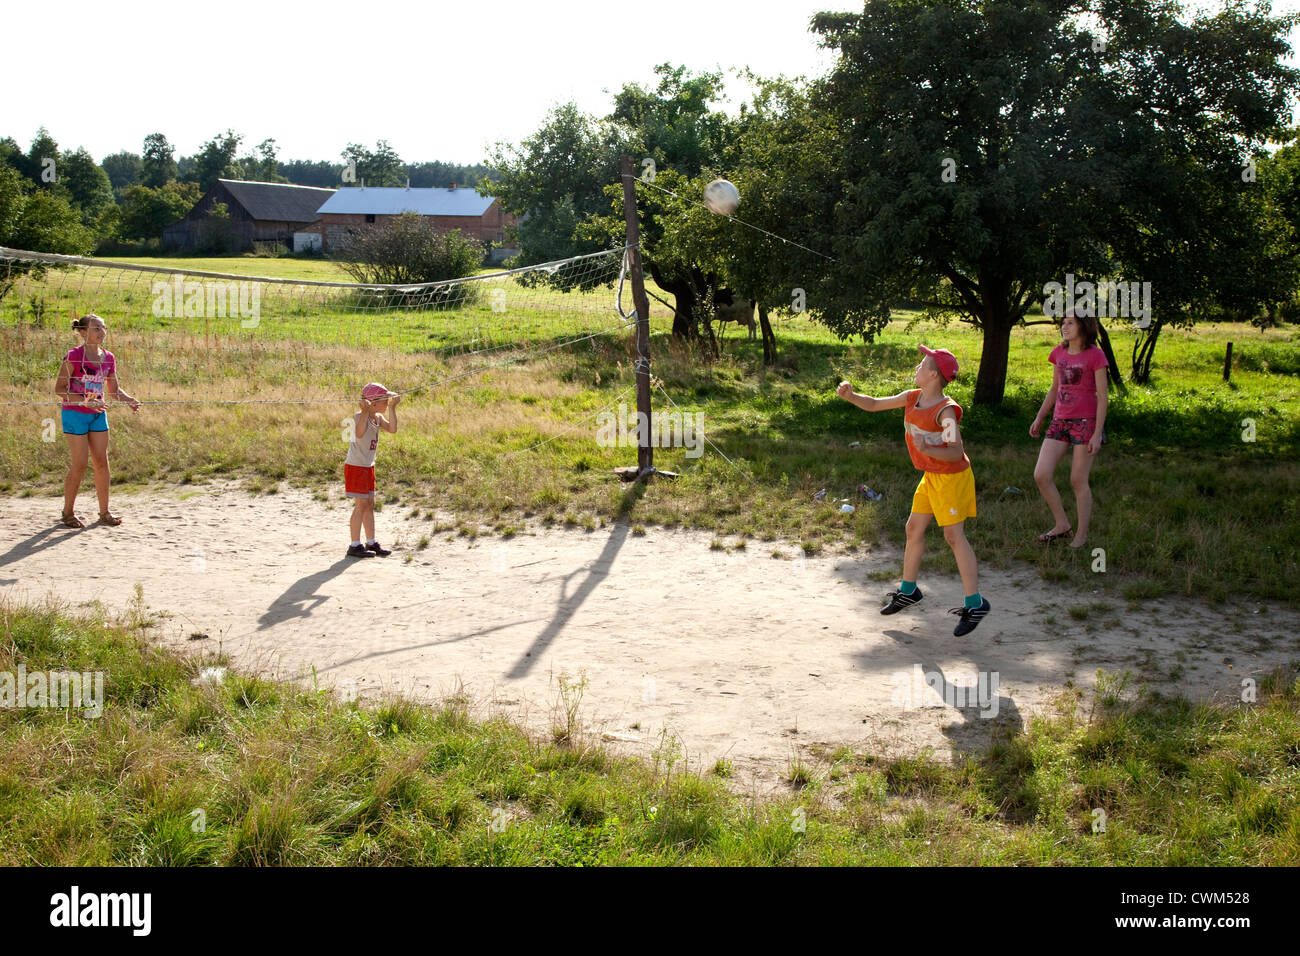 Polish teens and children playing volleyball on village sandlot court. Mala Wola Central Poland Stock Photo